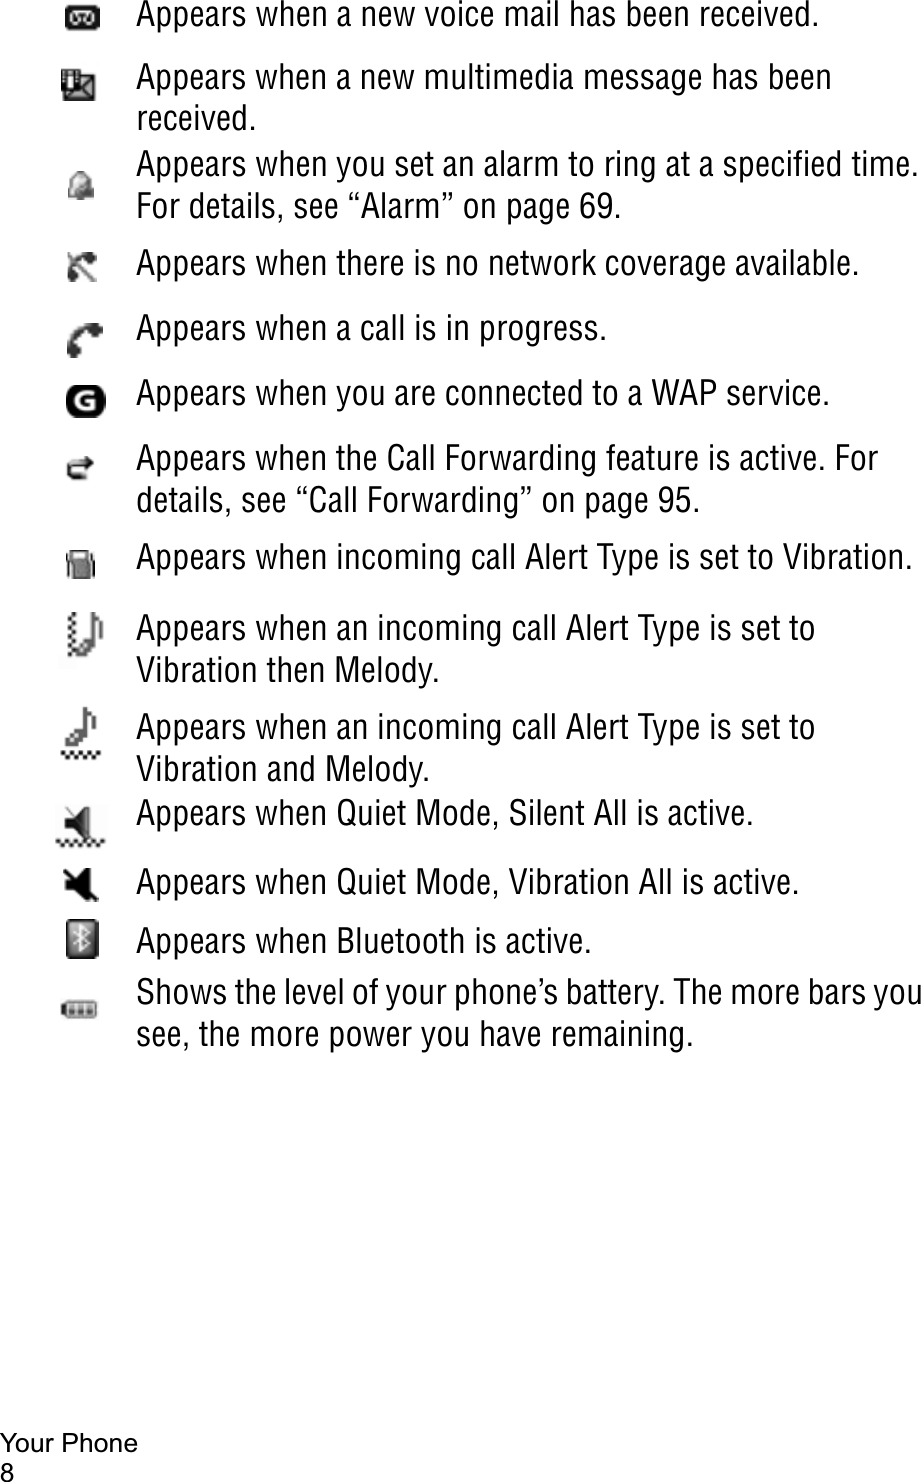 Your Phone8Appears when a new voice mail has been received.Appears when a new multimedia message has been received.Appears when you set an alarm to ring at a specified time. For details, see “Alarm” on page 69.Appears when there is no network coverage available.Appears when a call is in progress.Appears when you are connected to a WAP service.Appears when the Call Forwarding feature is active. For details, see “Call Forwarding” on page 95.Appears when incoming call Alert Type is set to Vibration. Appears when an incoming call Alert Type is set to Vibration then Melody.Appears when an incoming call Alert Type is set to Vibration and Melody.Appears when Quiet Mode, Silent All is active.Appears when Quiet Mode, Vibration All is active.Appears when Bluetooth is active.Shows the level of your phone’s battery. The more bars you see, the more power you have remaining.